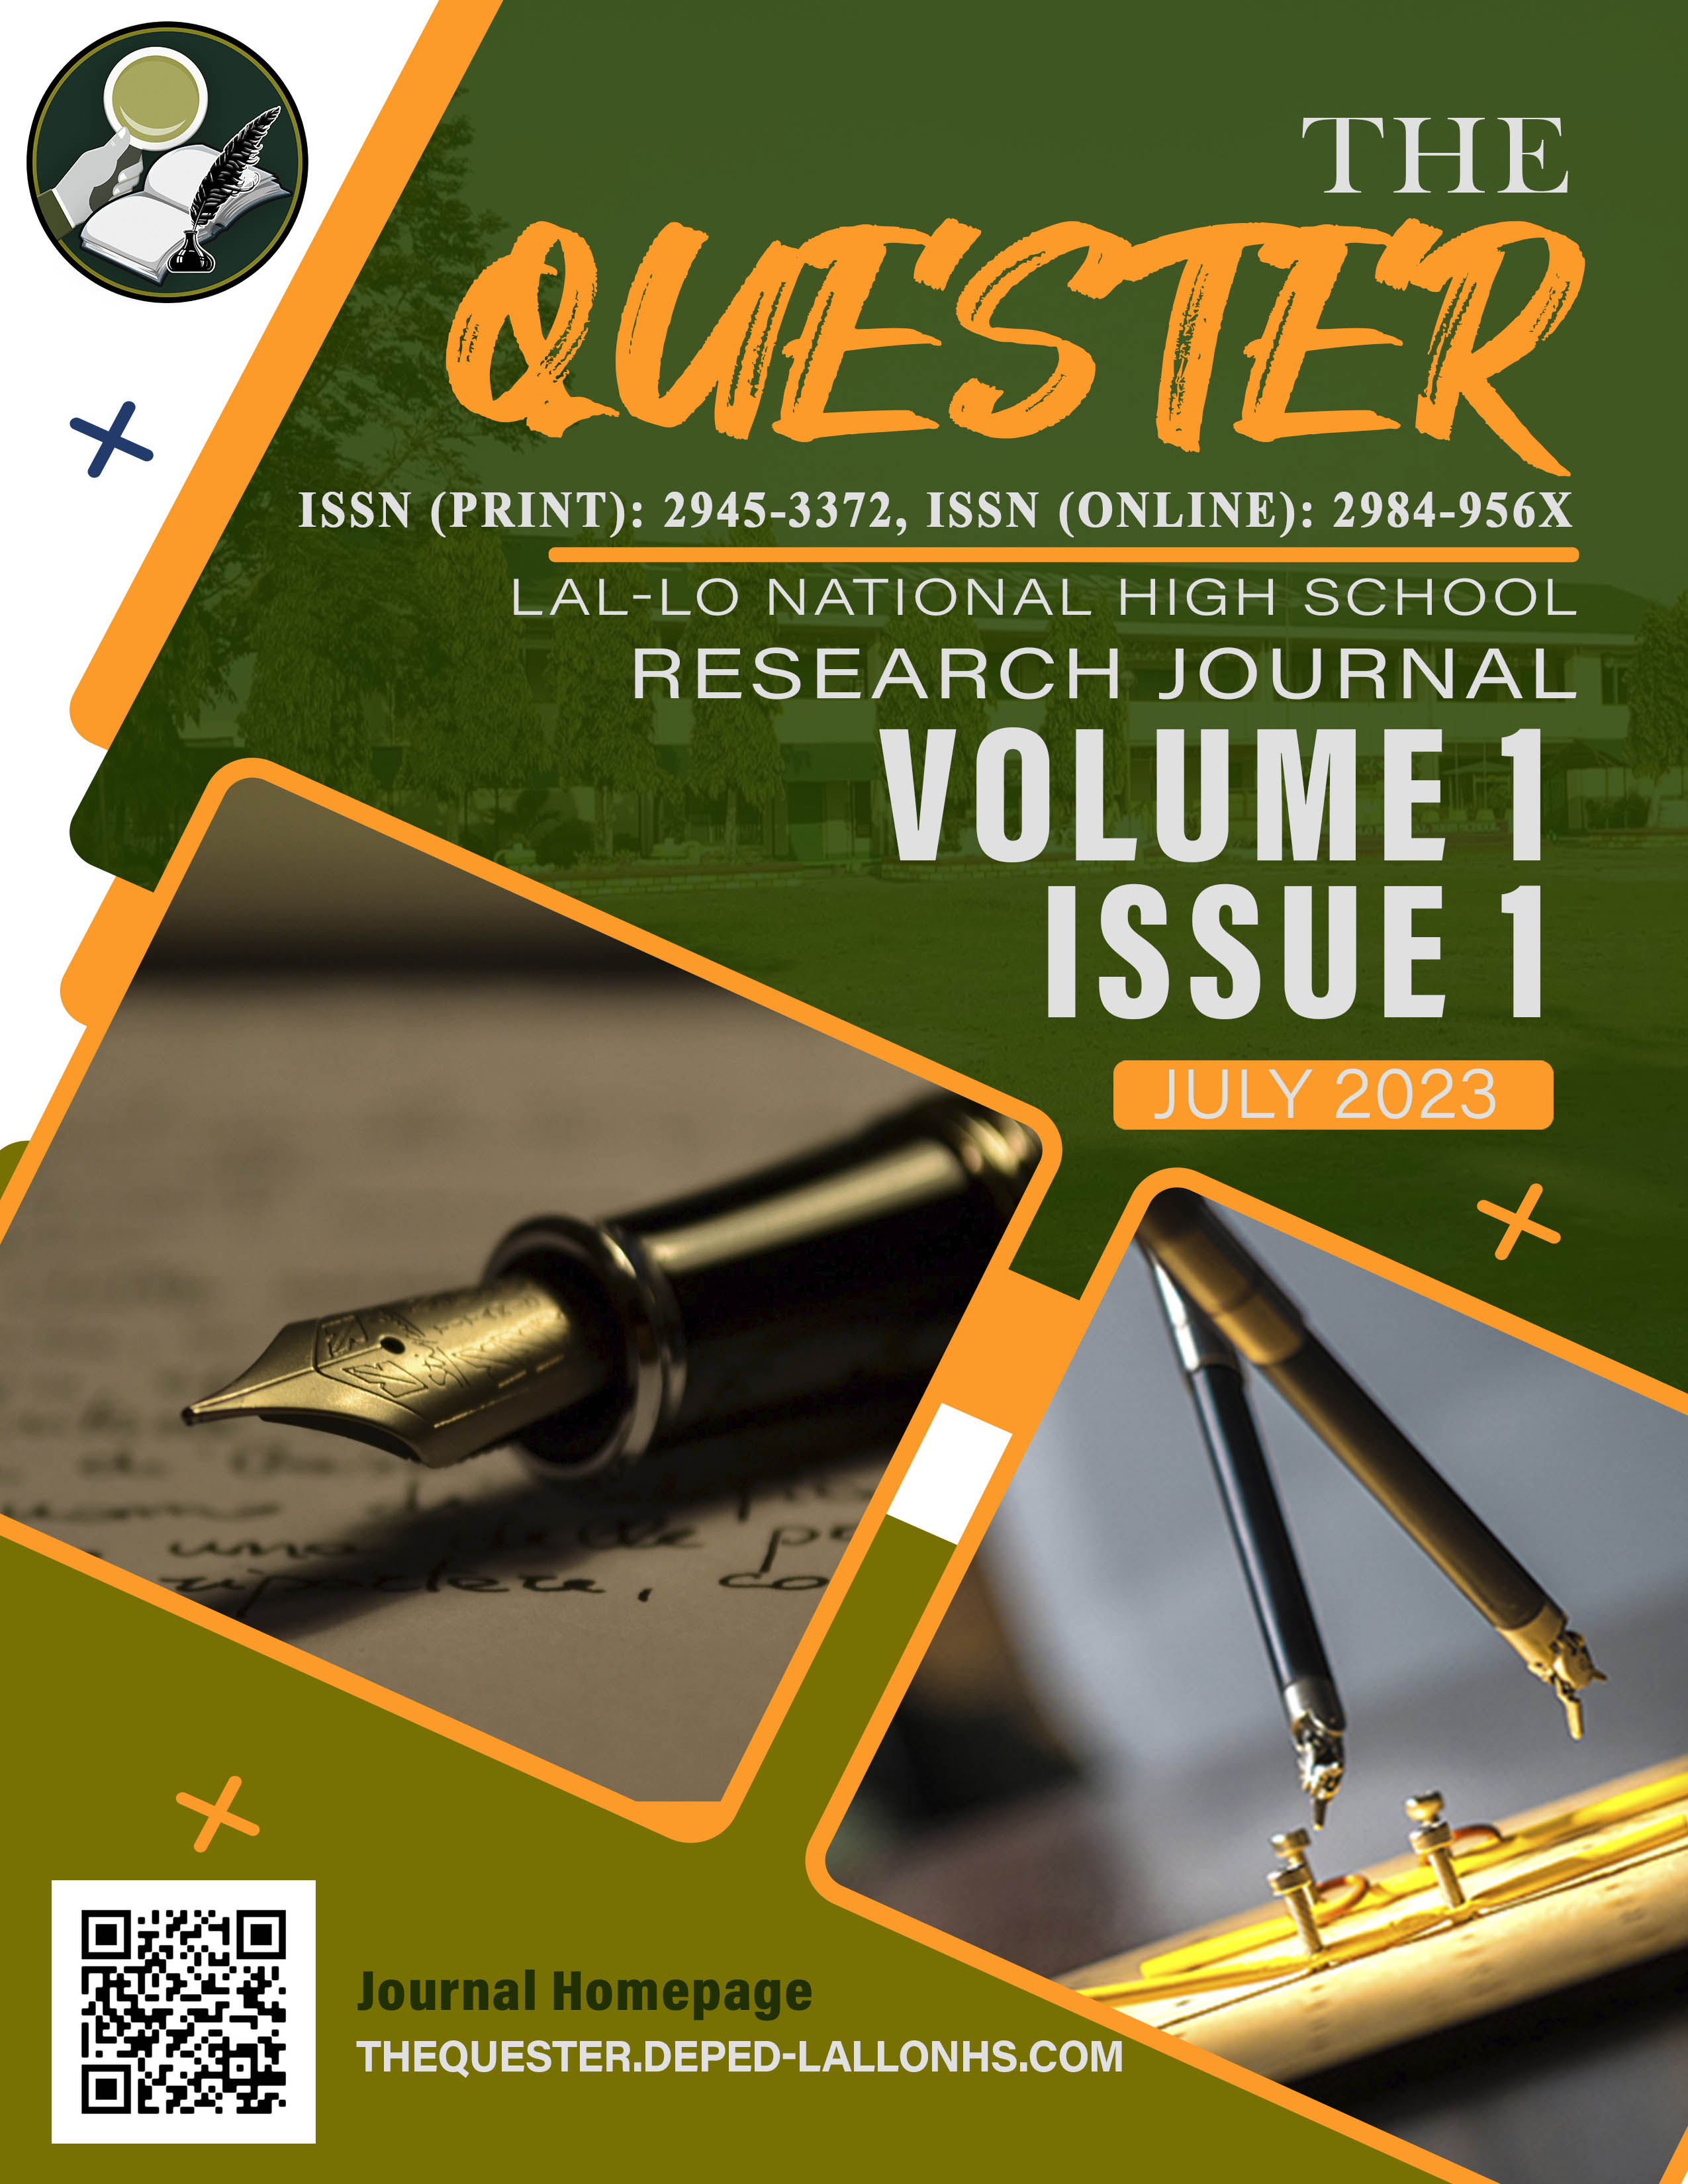 vol-1-no-1-2023-volume-1-no-1-july-2023-issue-the-quester